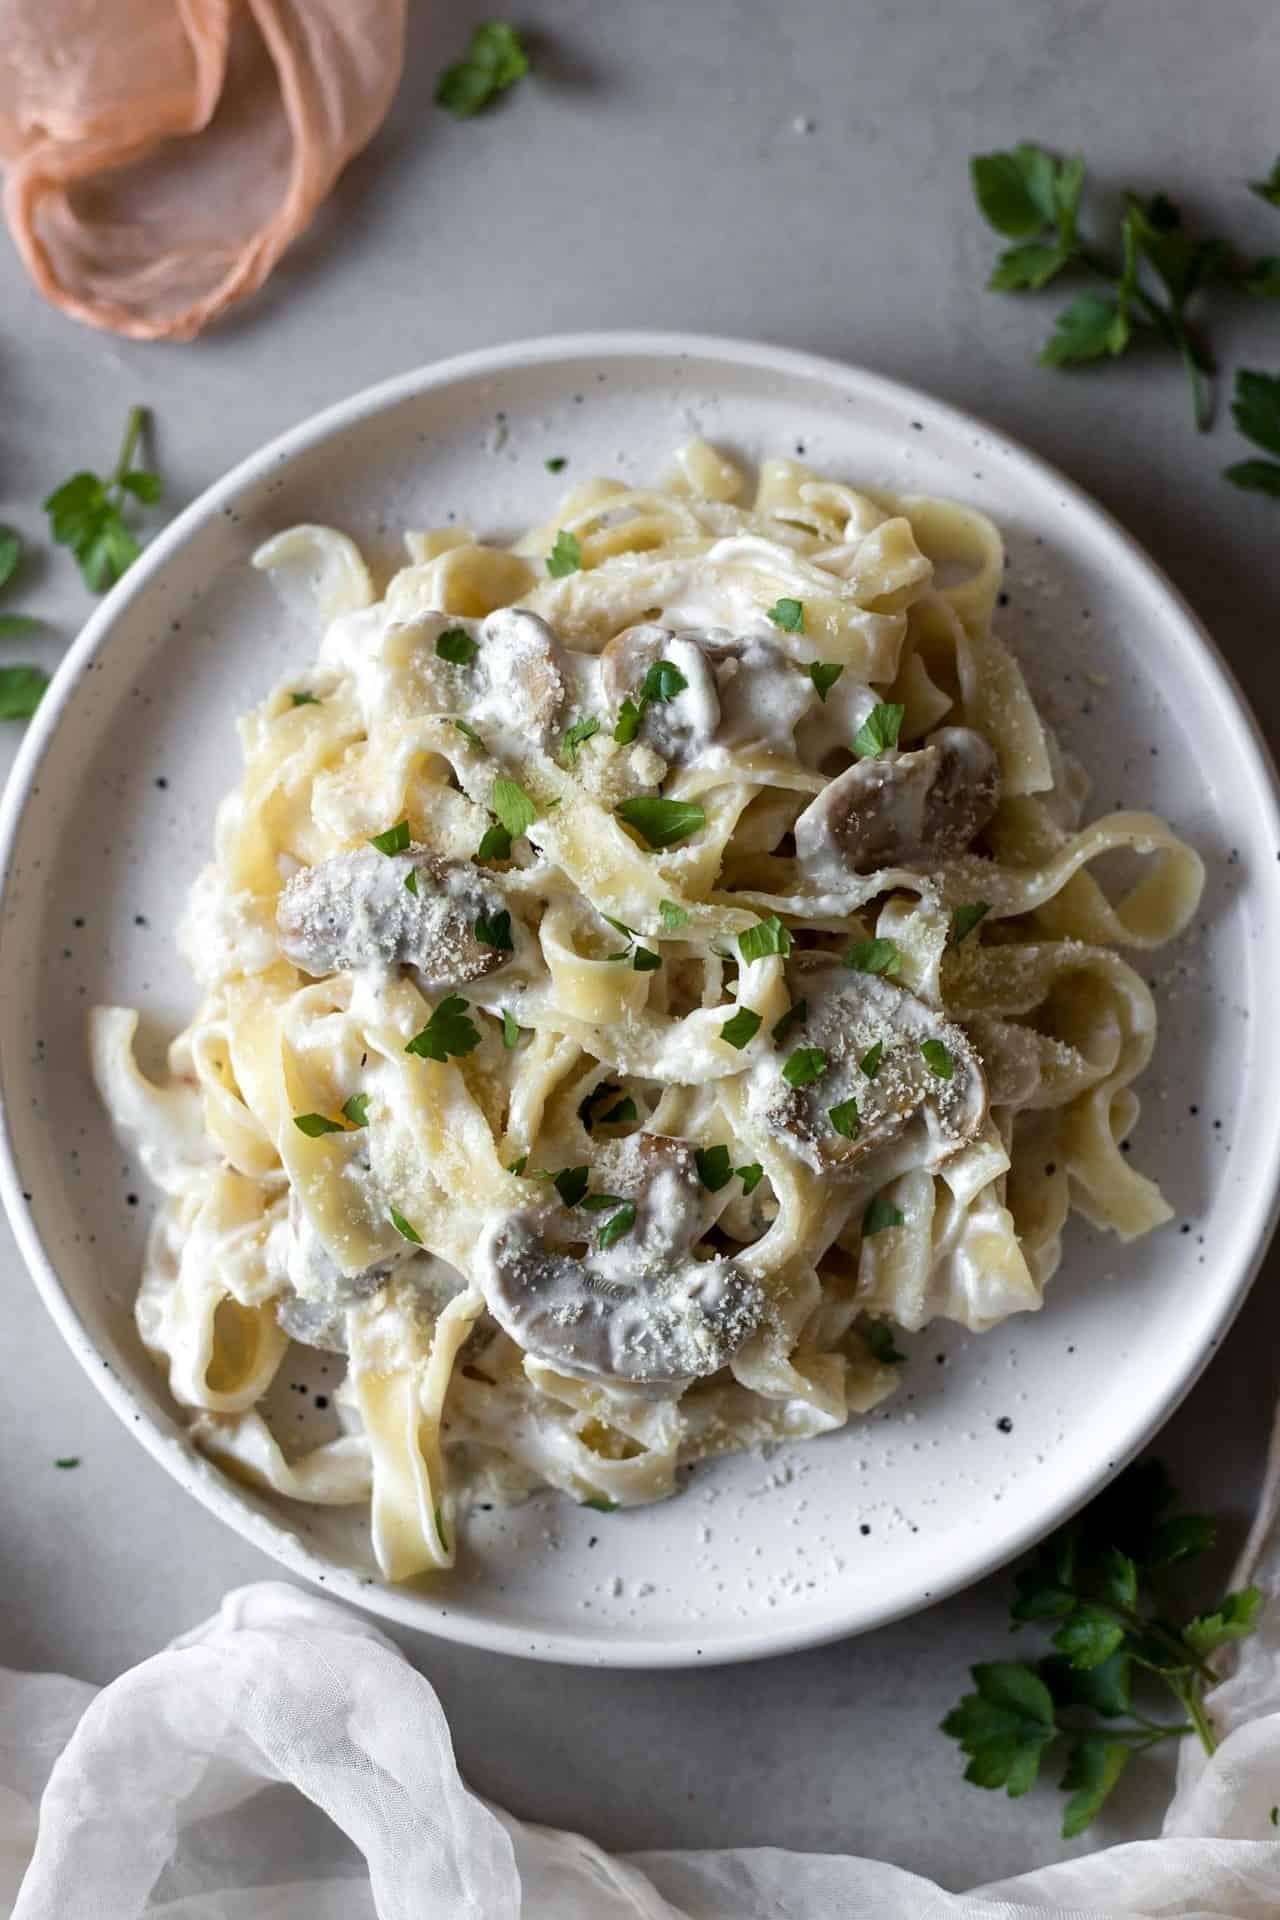 This Low FODMAP Mushroom Fettuccine is super creamy, flavorful and so delicious. Moreover is easy to digest and makes a filling lunch or dinner.